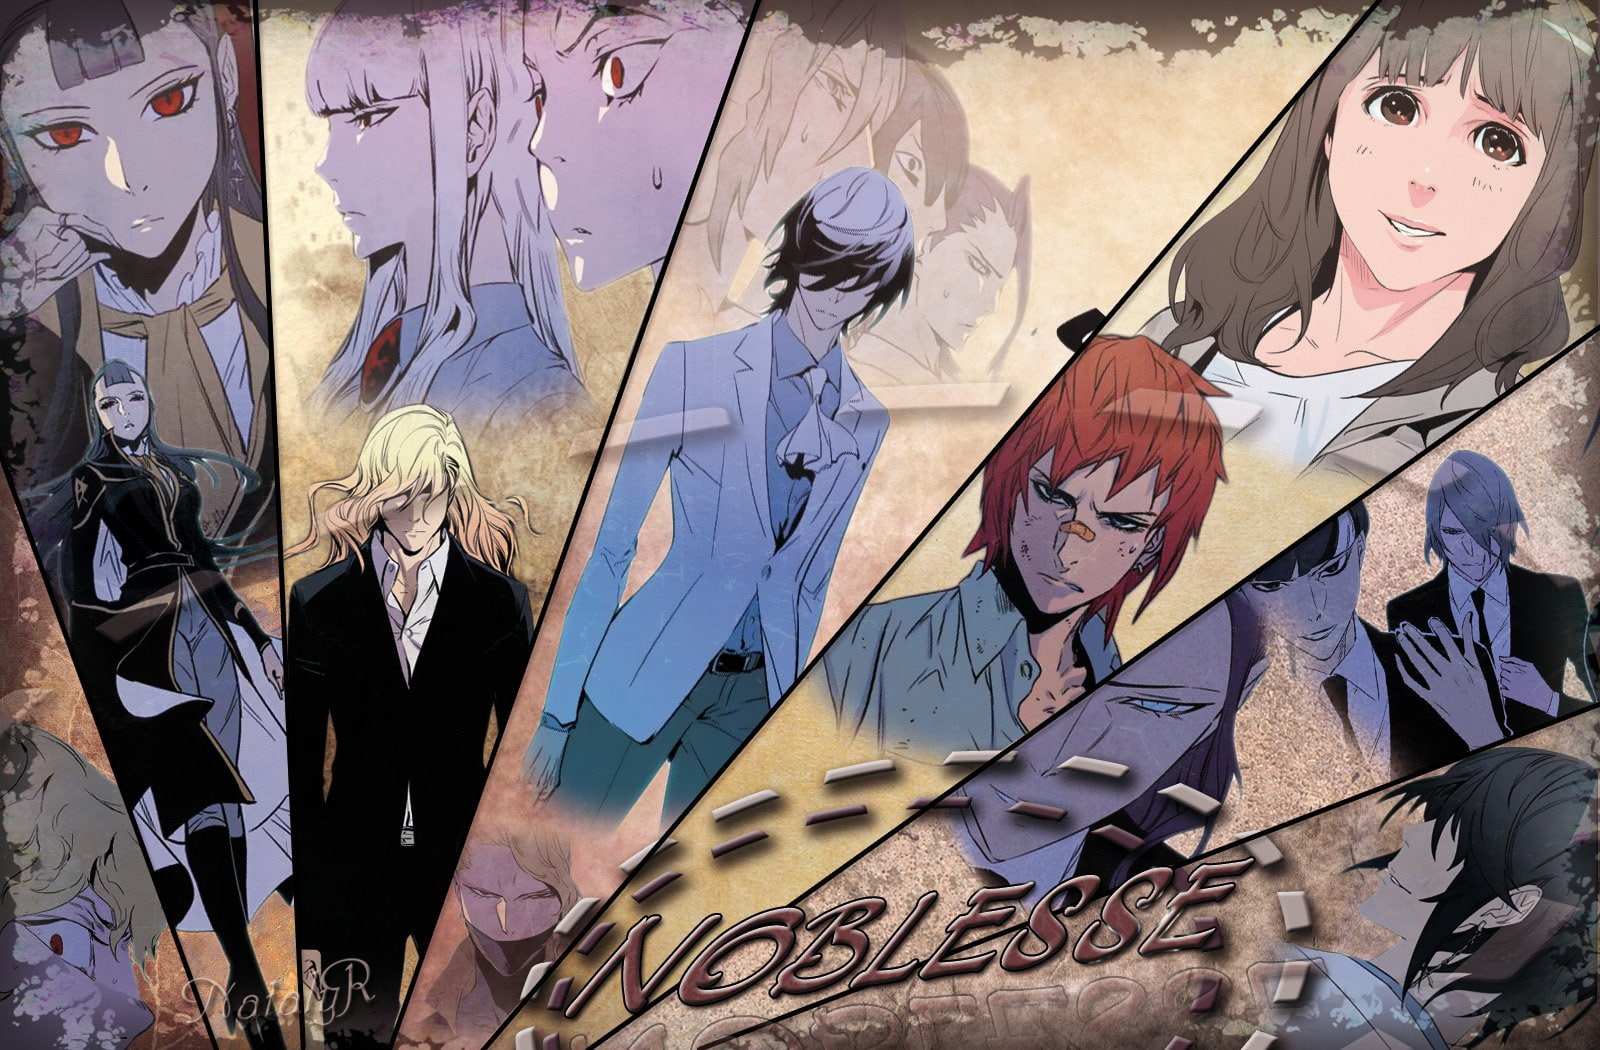 My new poster #Noblesse #anime #weeb... - Sugoi anime prints | Facebook